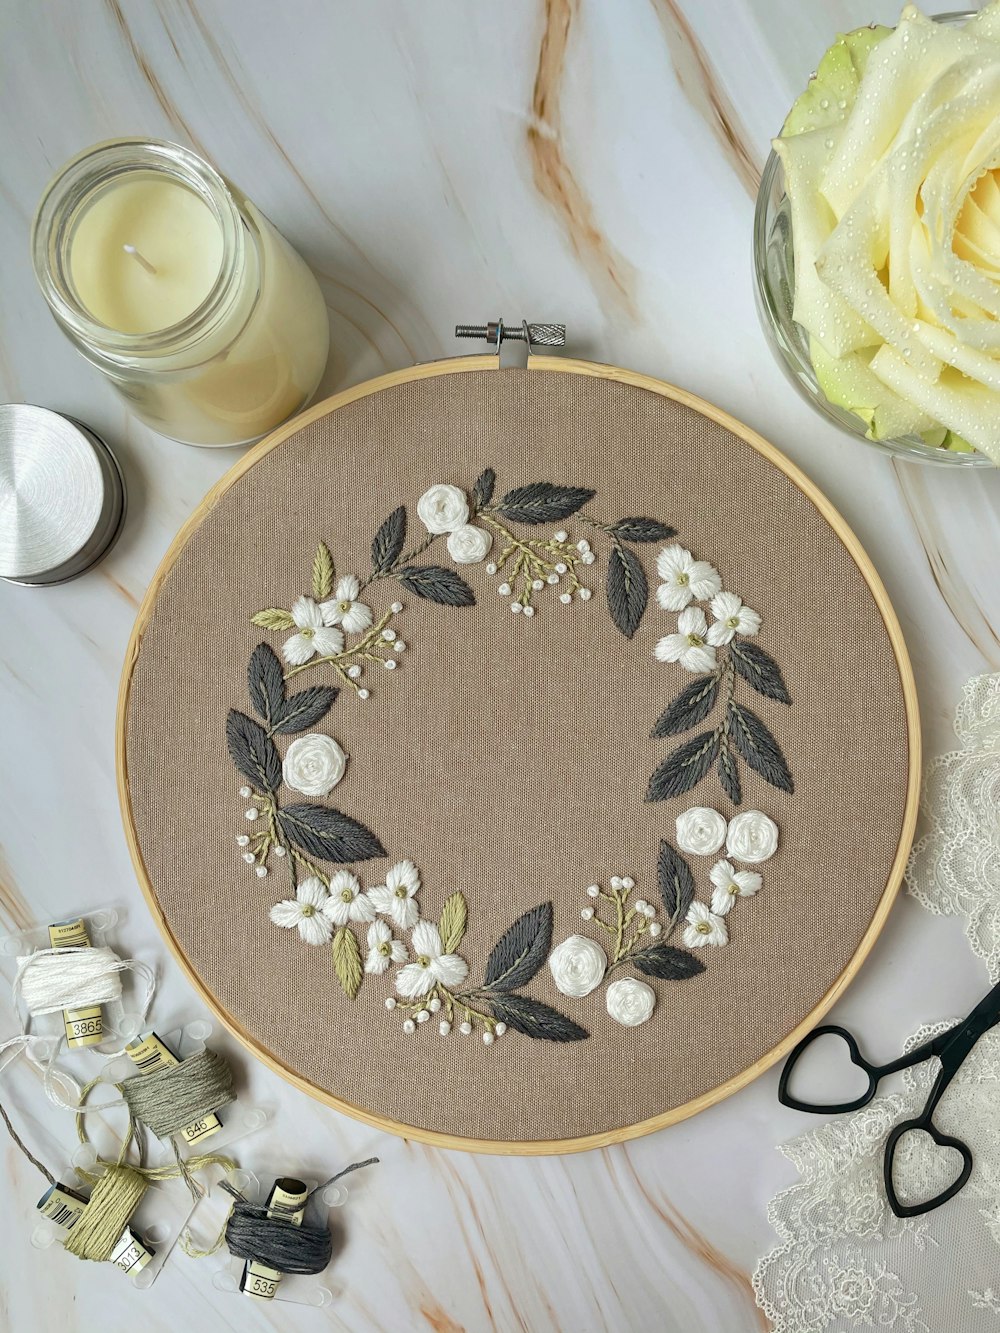 Embroidery Hoop Pictures  Download Free Images on Unsplash